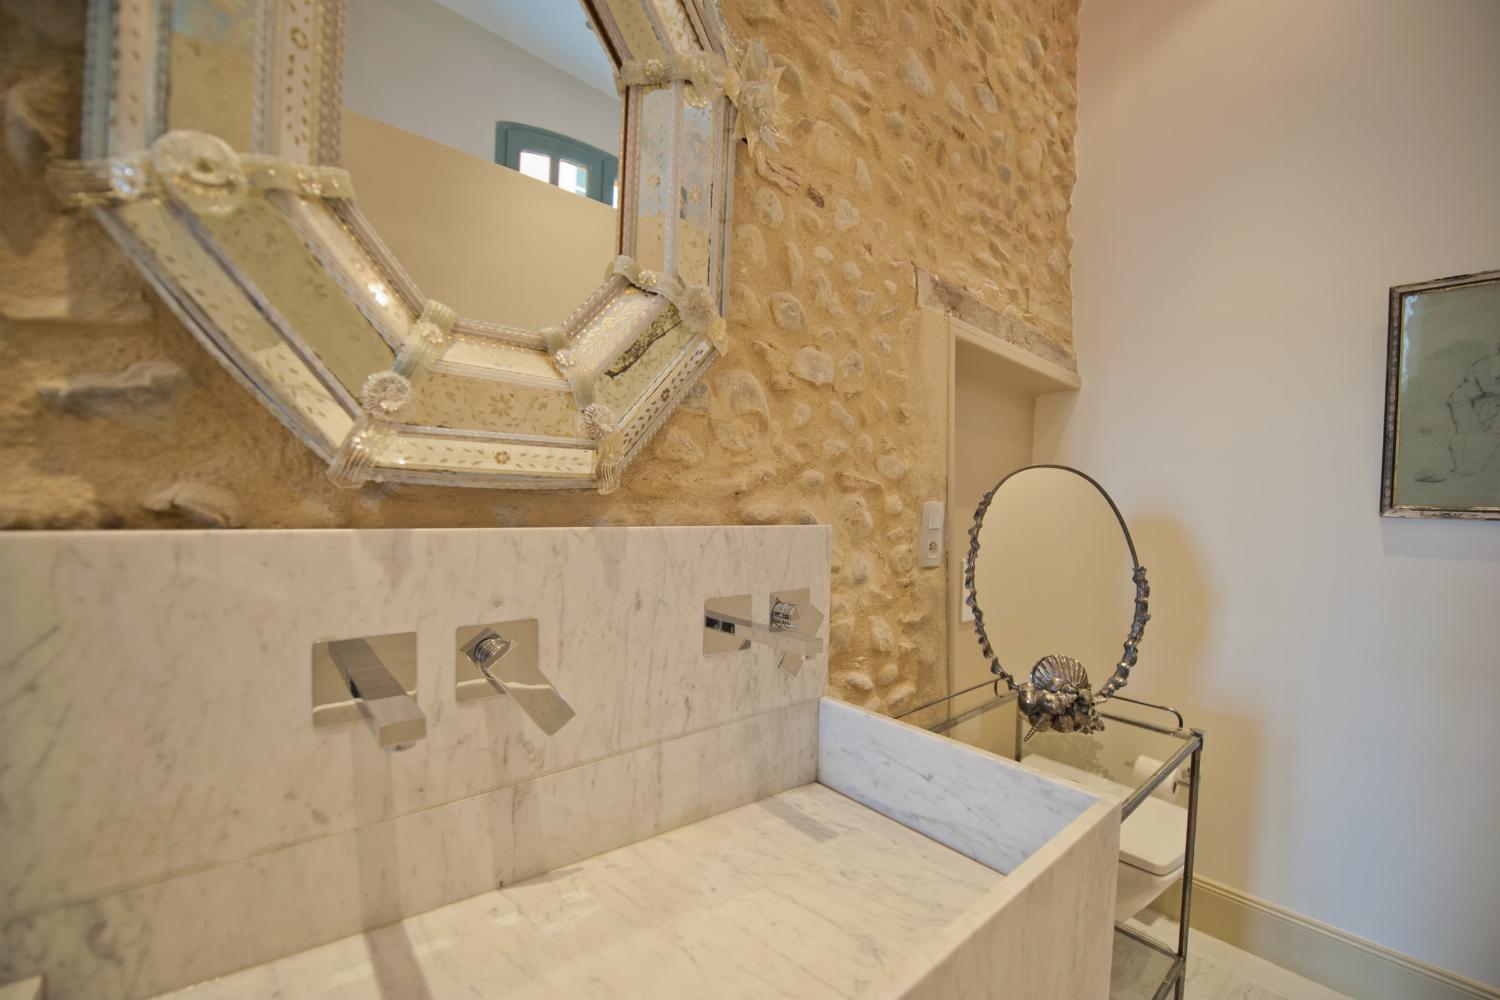 Bathroom | Rental home in South of France